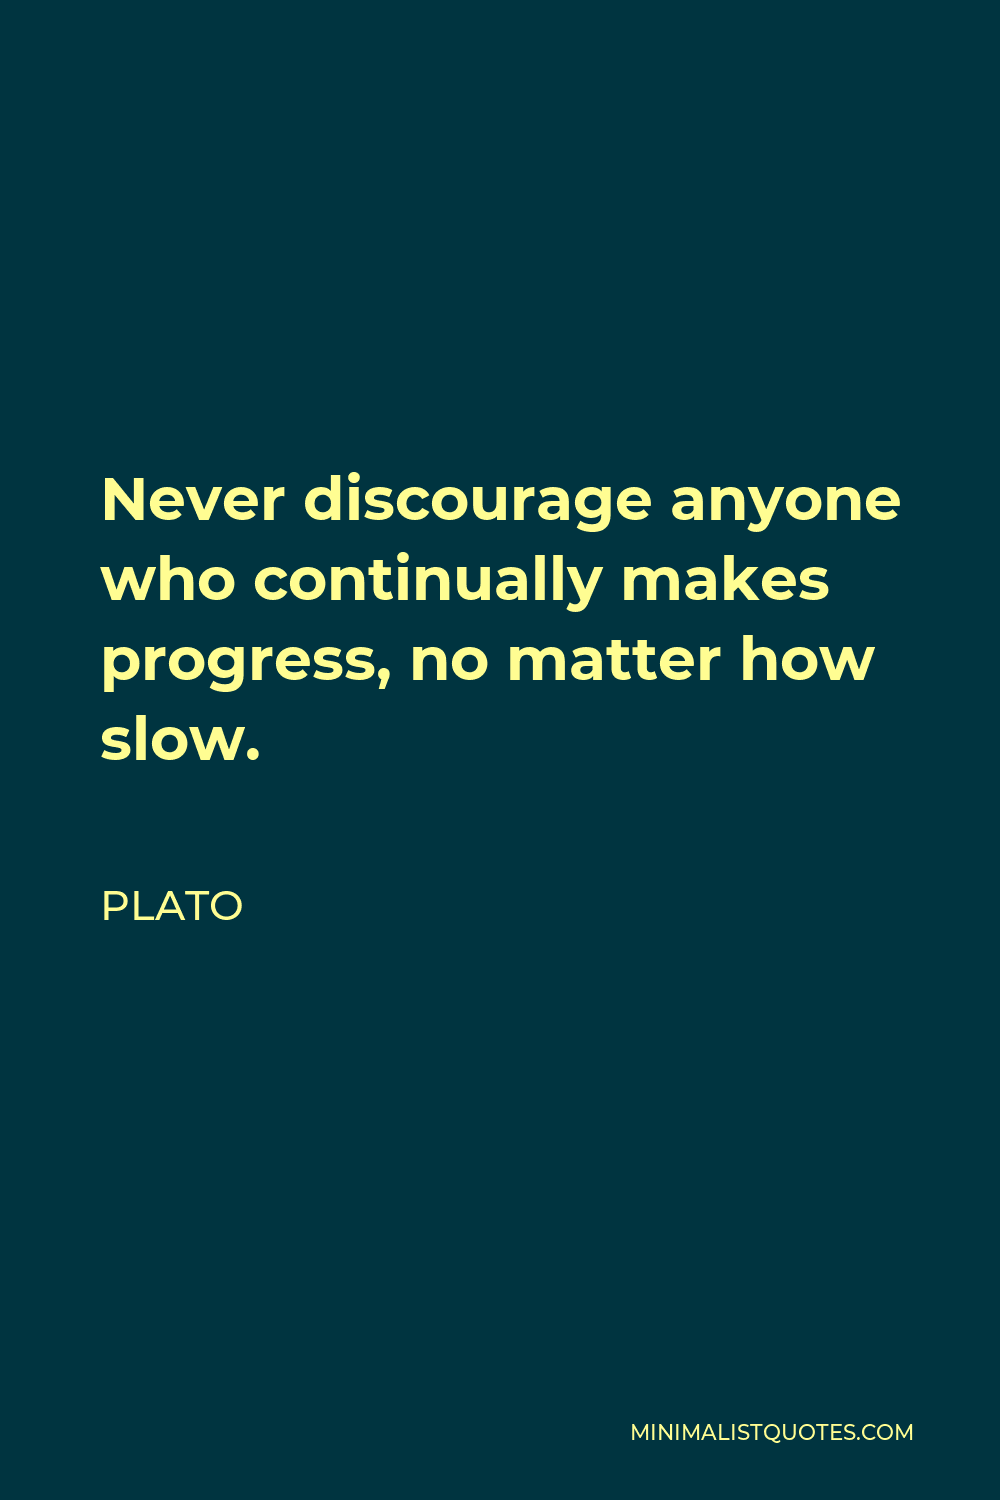 Plato Quote - Never discourage anyone who continually makes progress, no matter how slow.